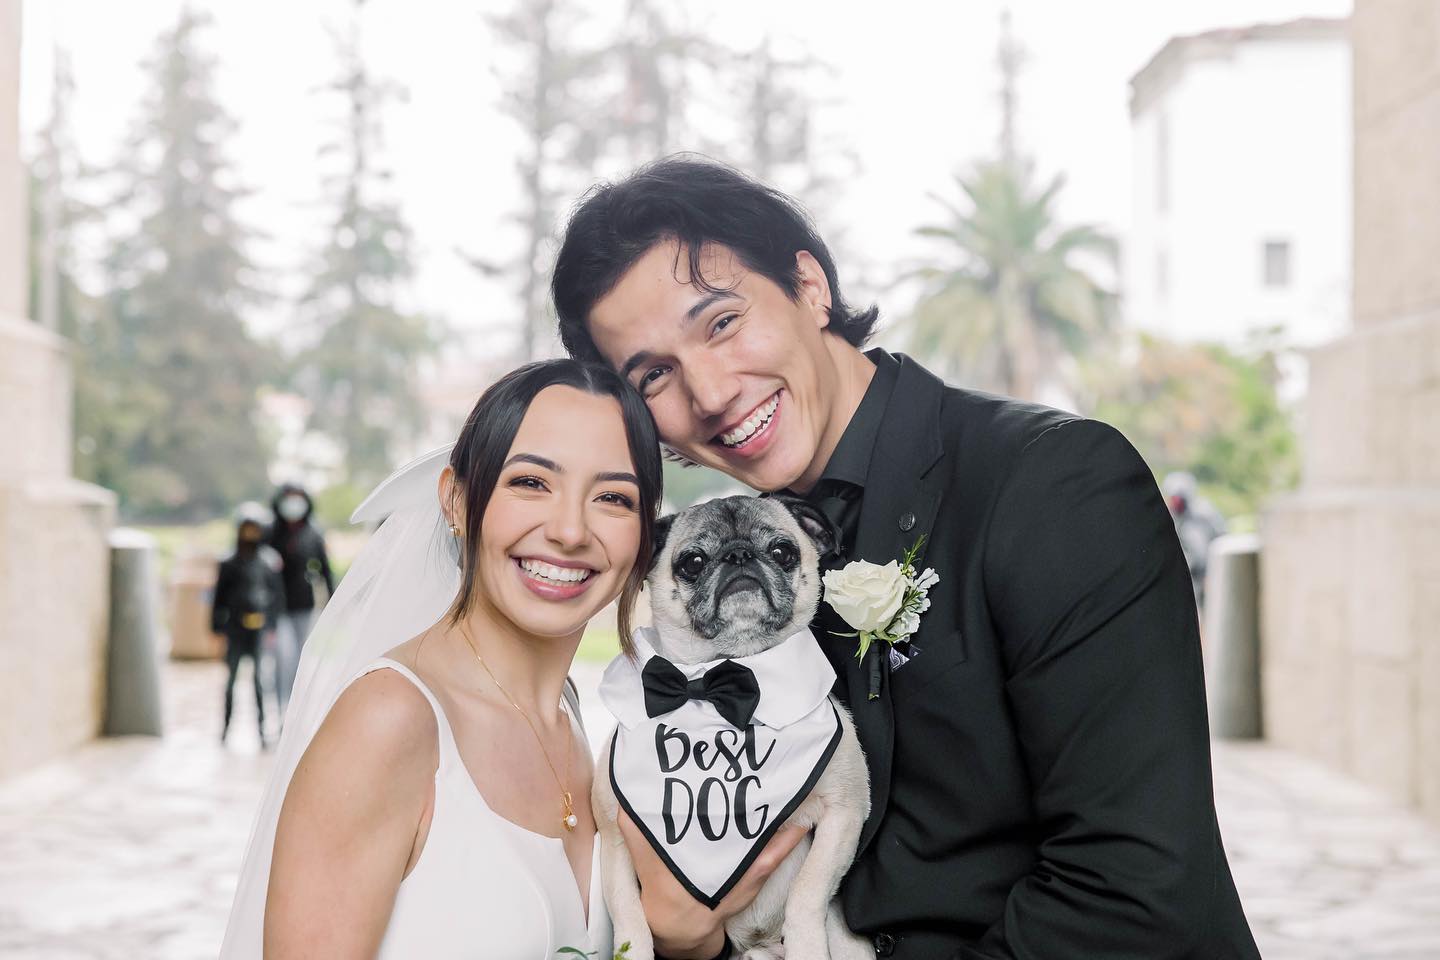 Aaron Burriss and his wife, Veronica Merrell, holding their pet dog at their wedding